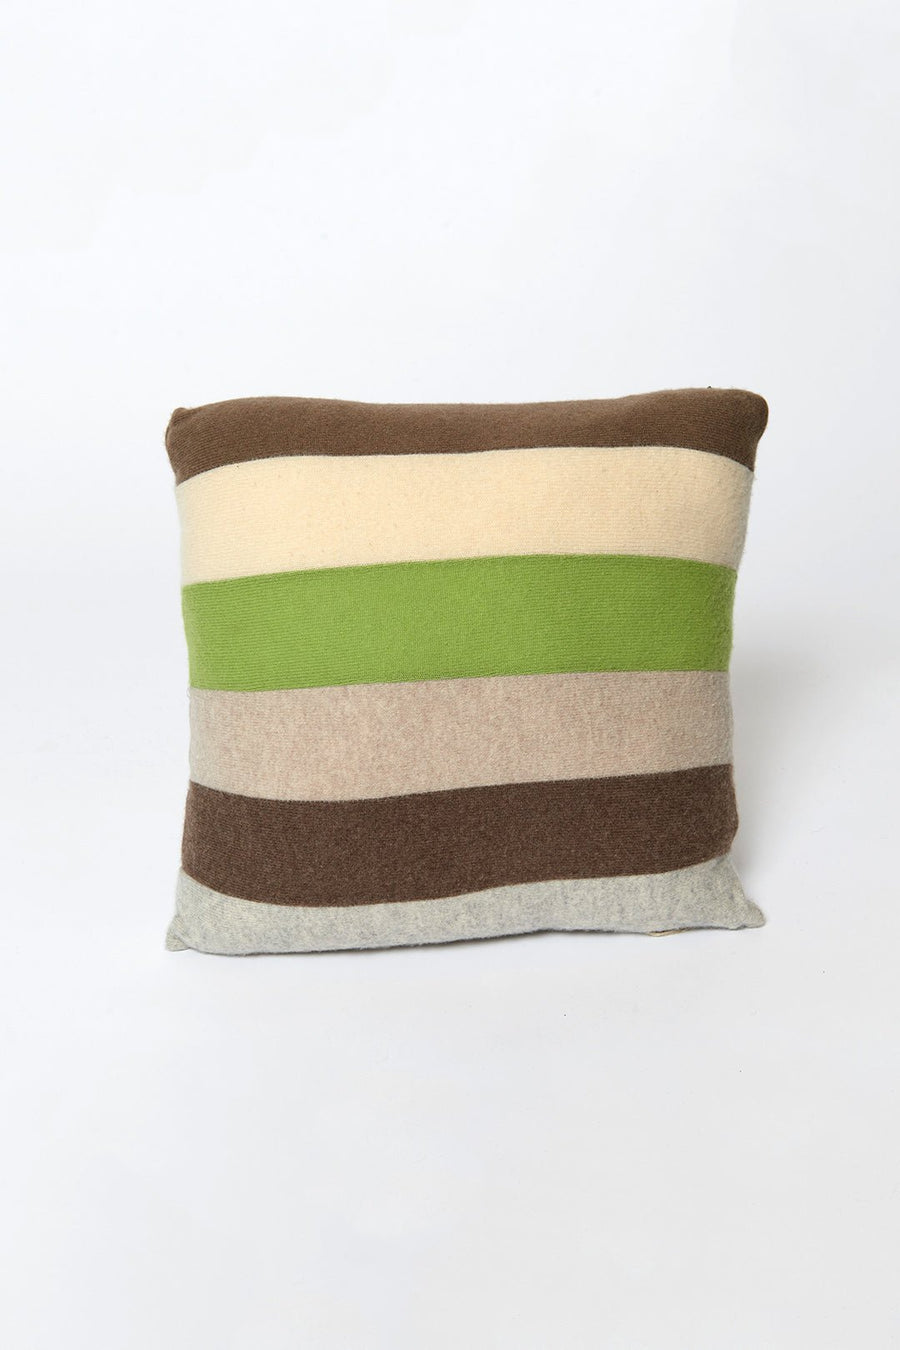 SMALL CASHMERE PILLOW - Burning Torch Online Boutique